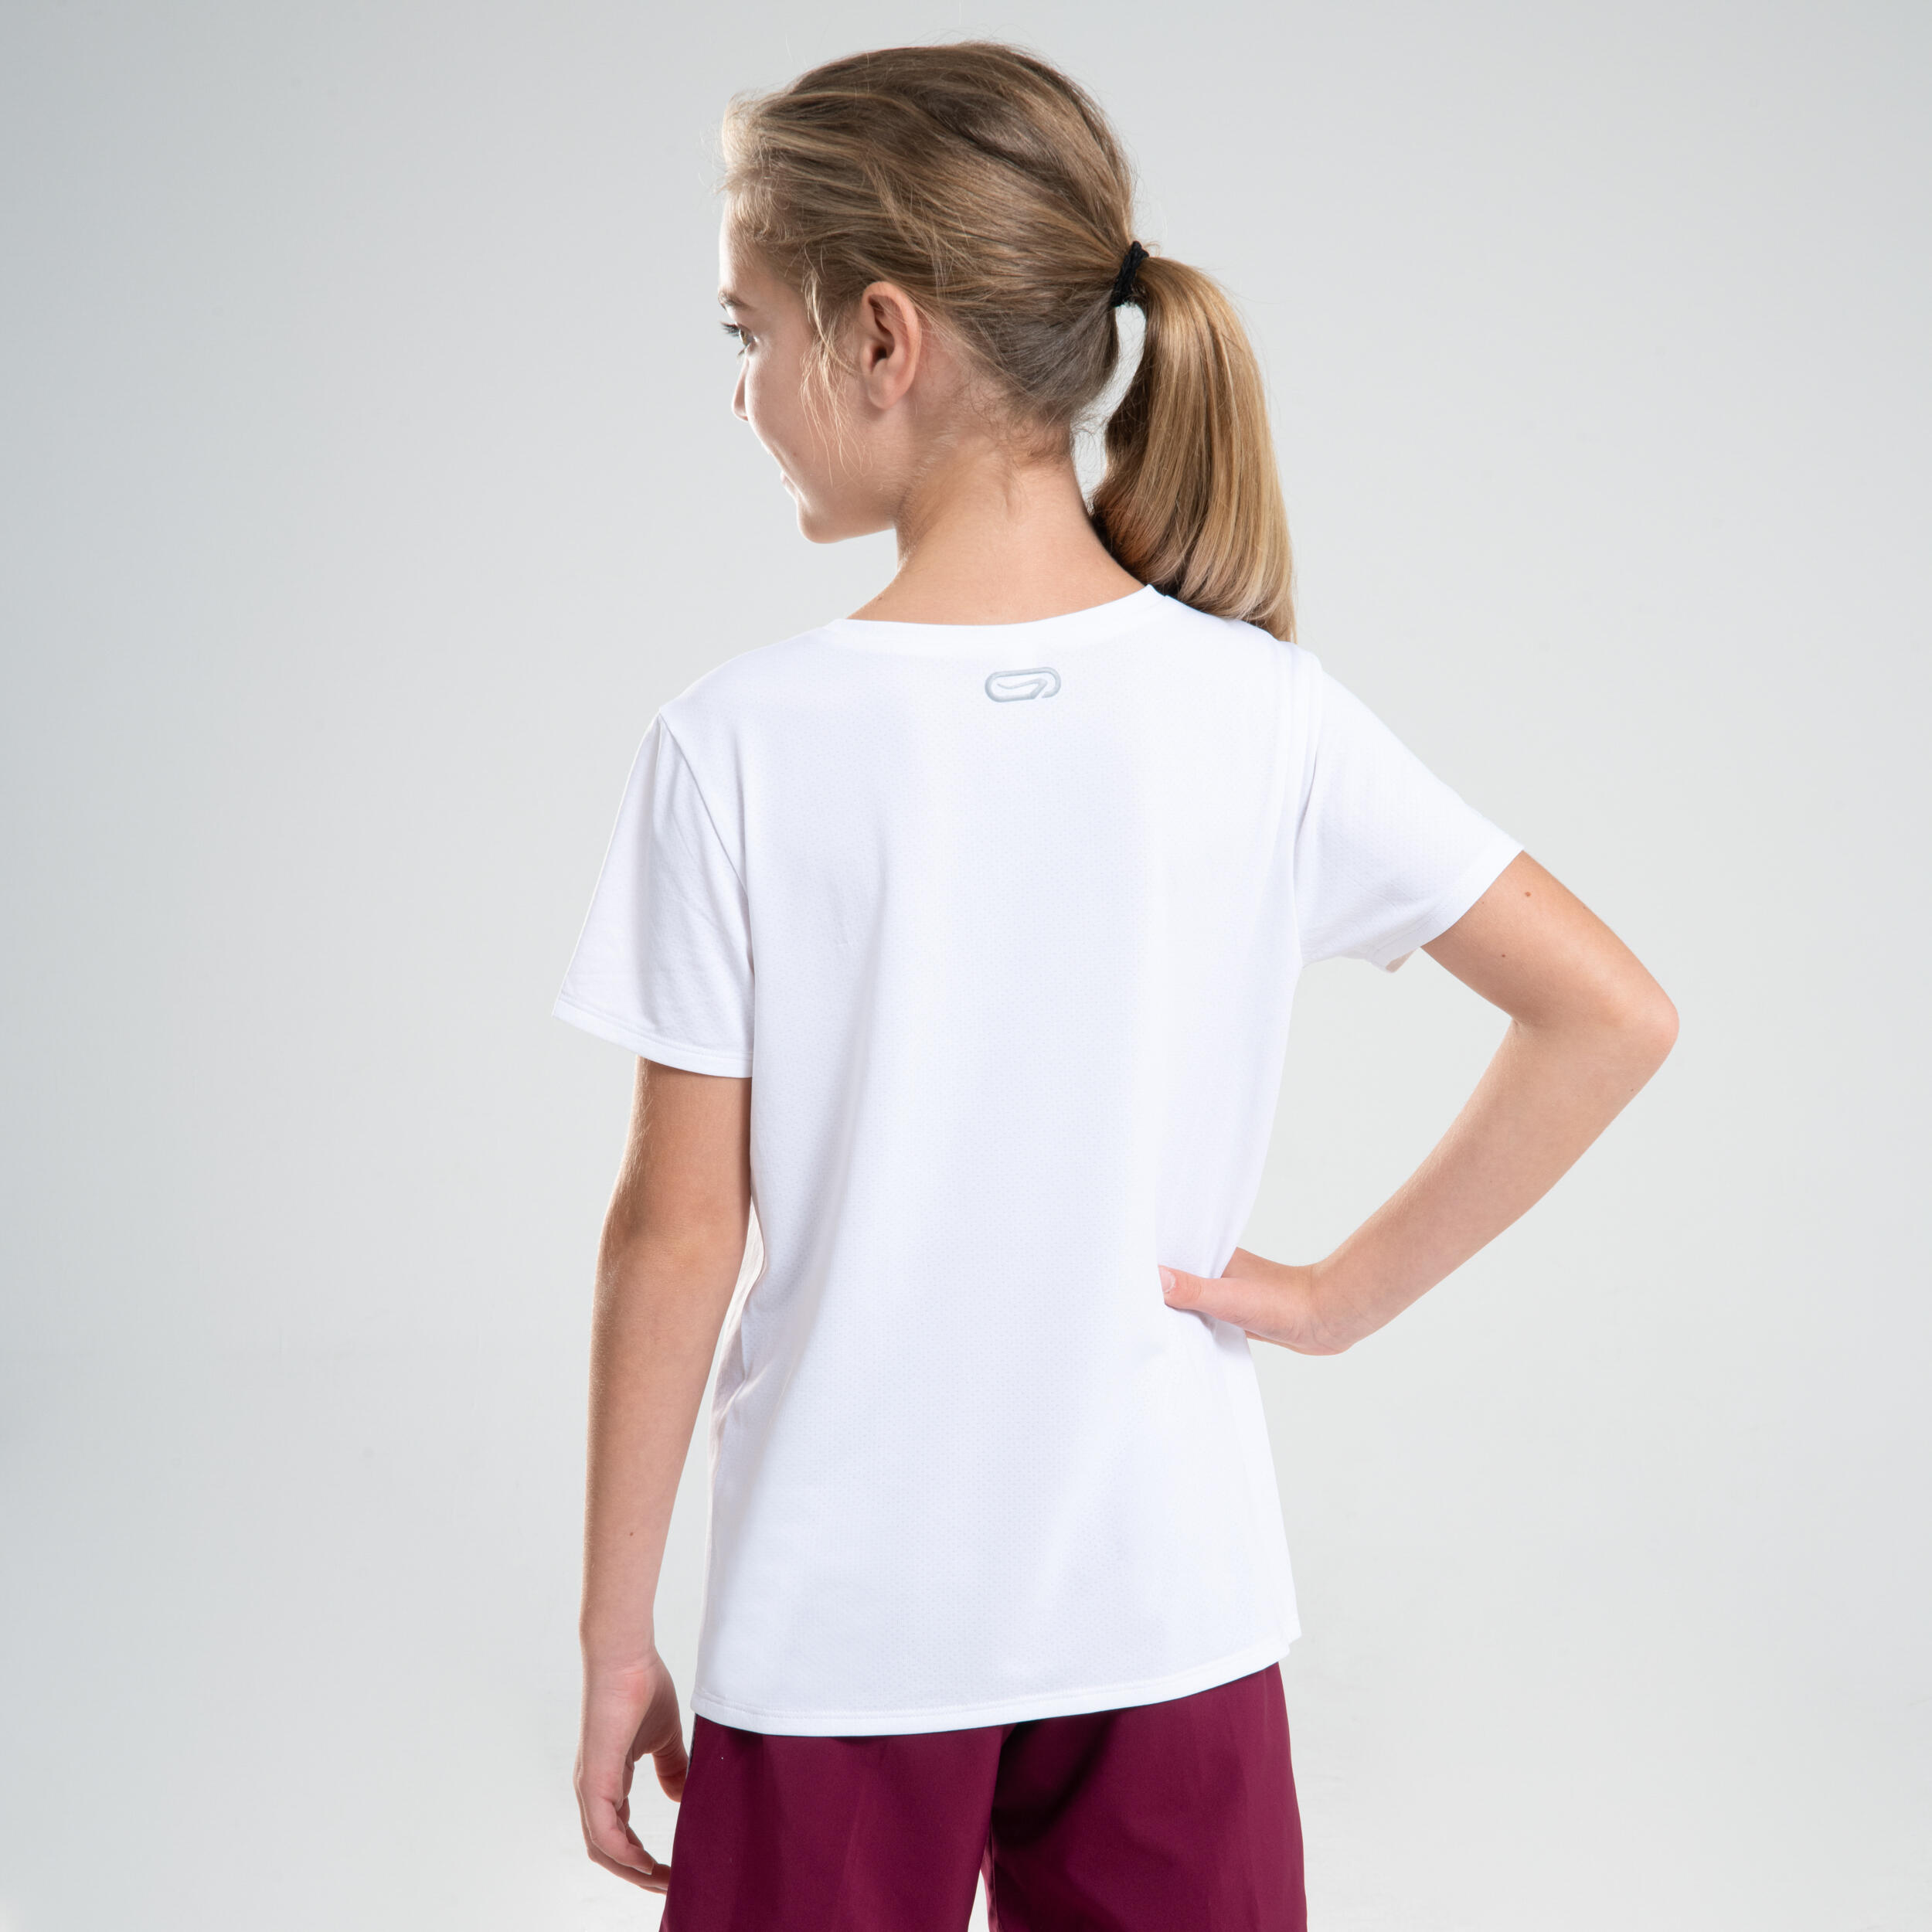 Kids' Breathable T-Shirt 5/8